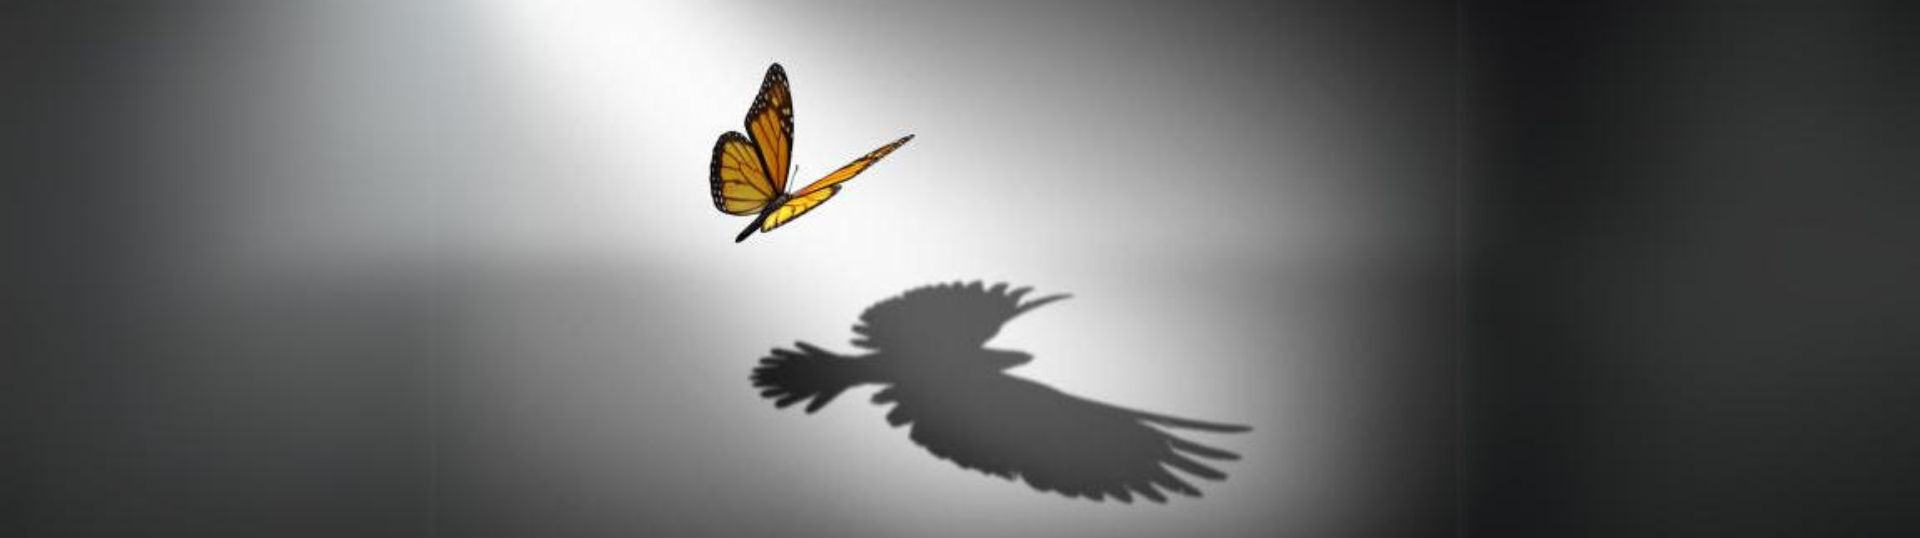 Butterfly shadow casting into an eagle